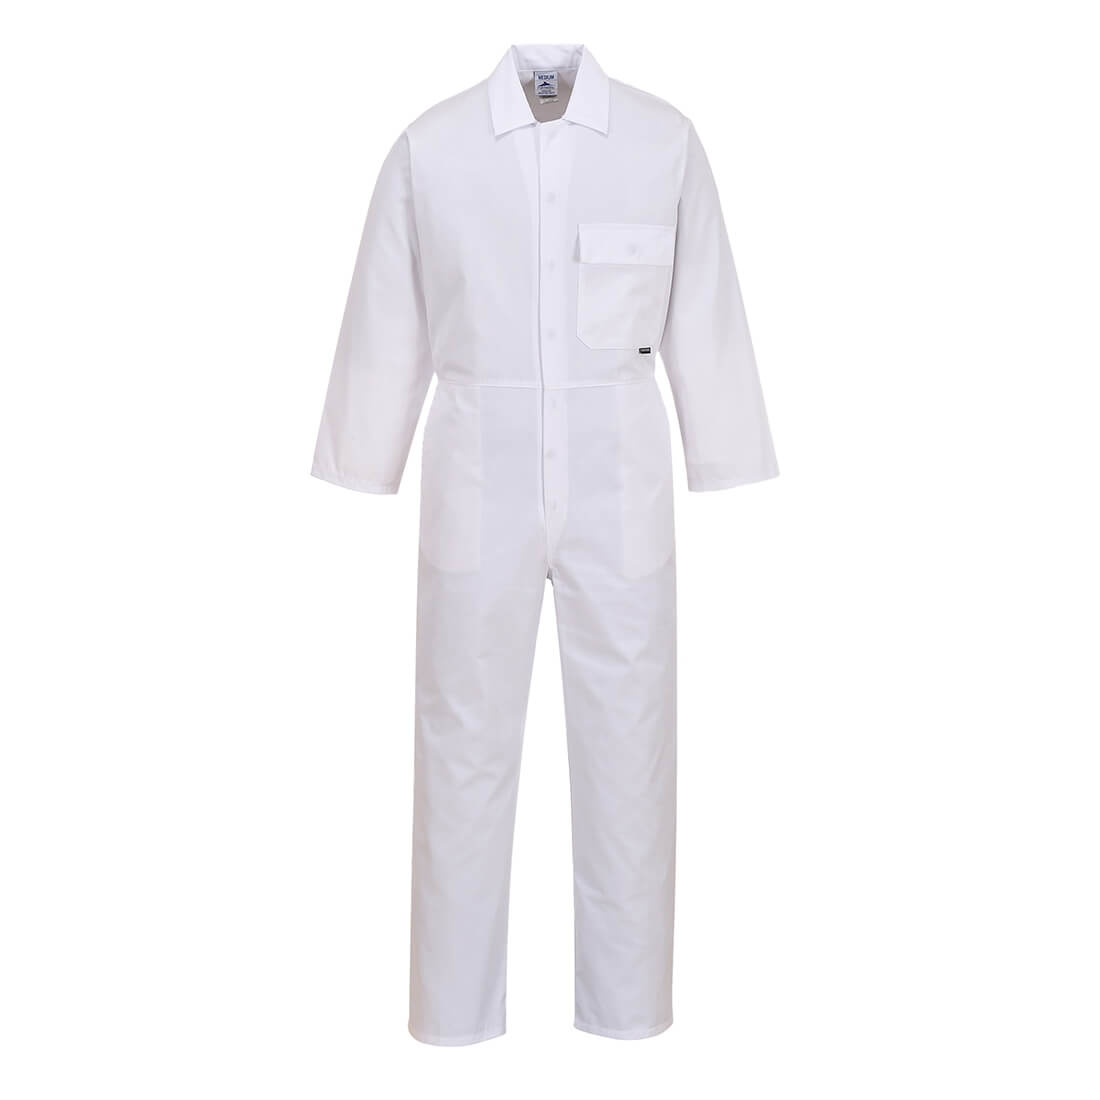 Standard Coverall - Safetywear